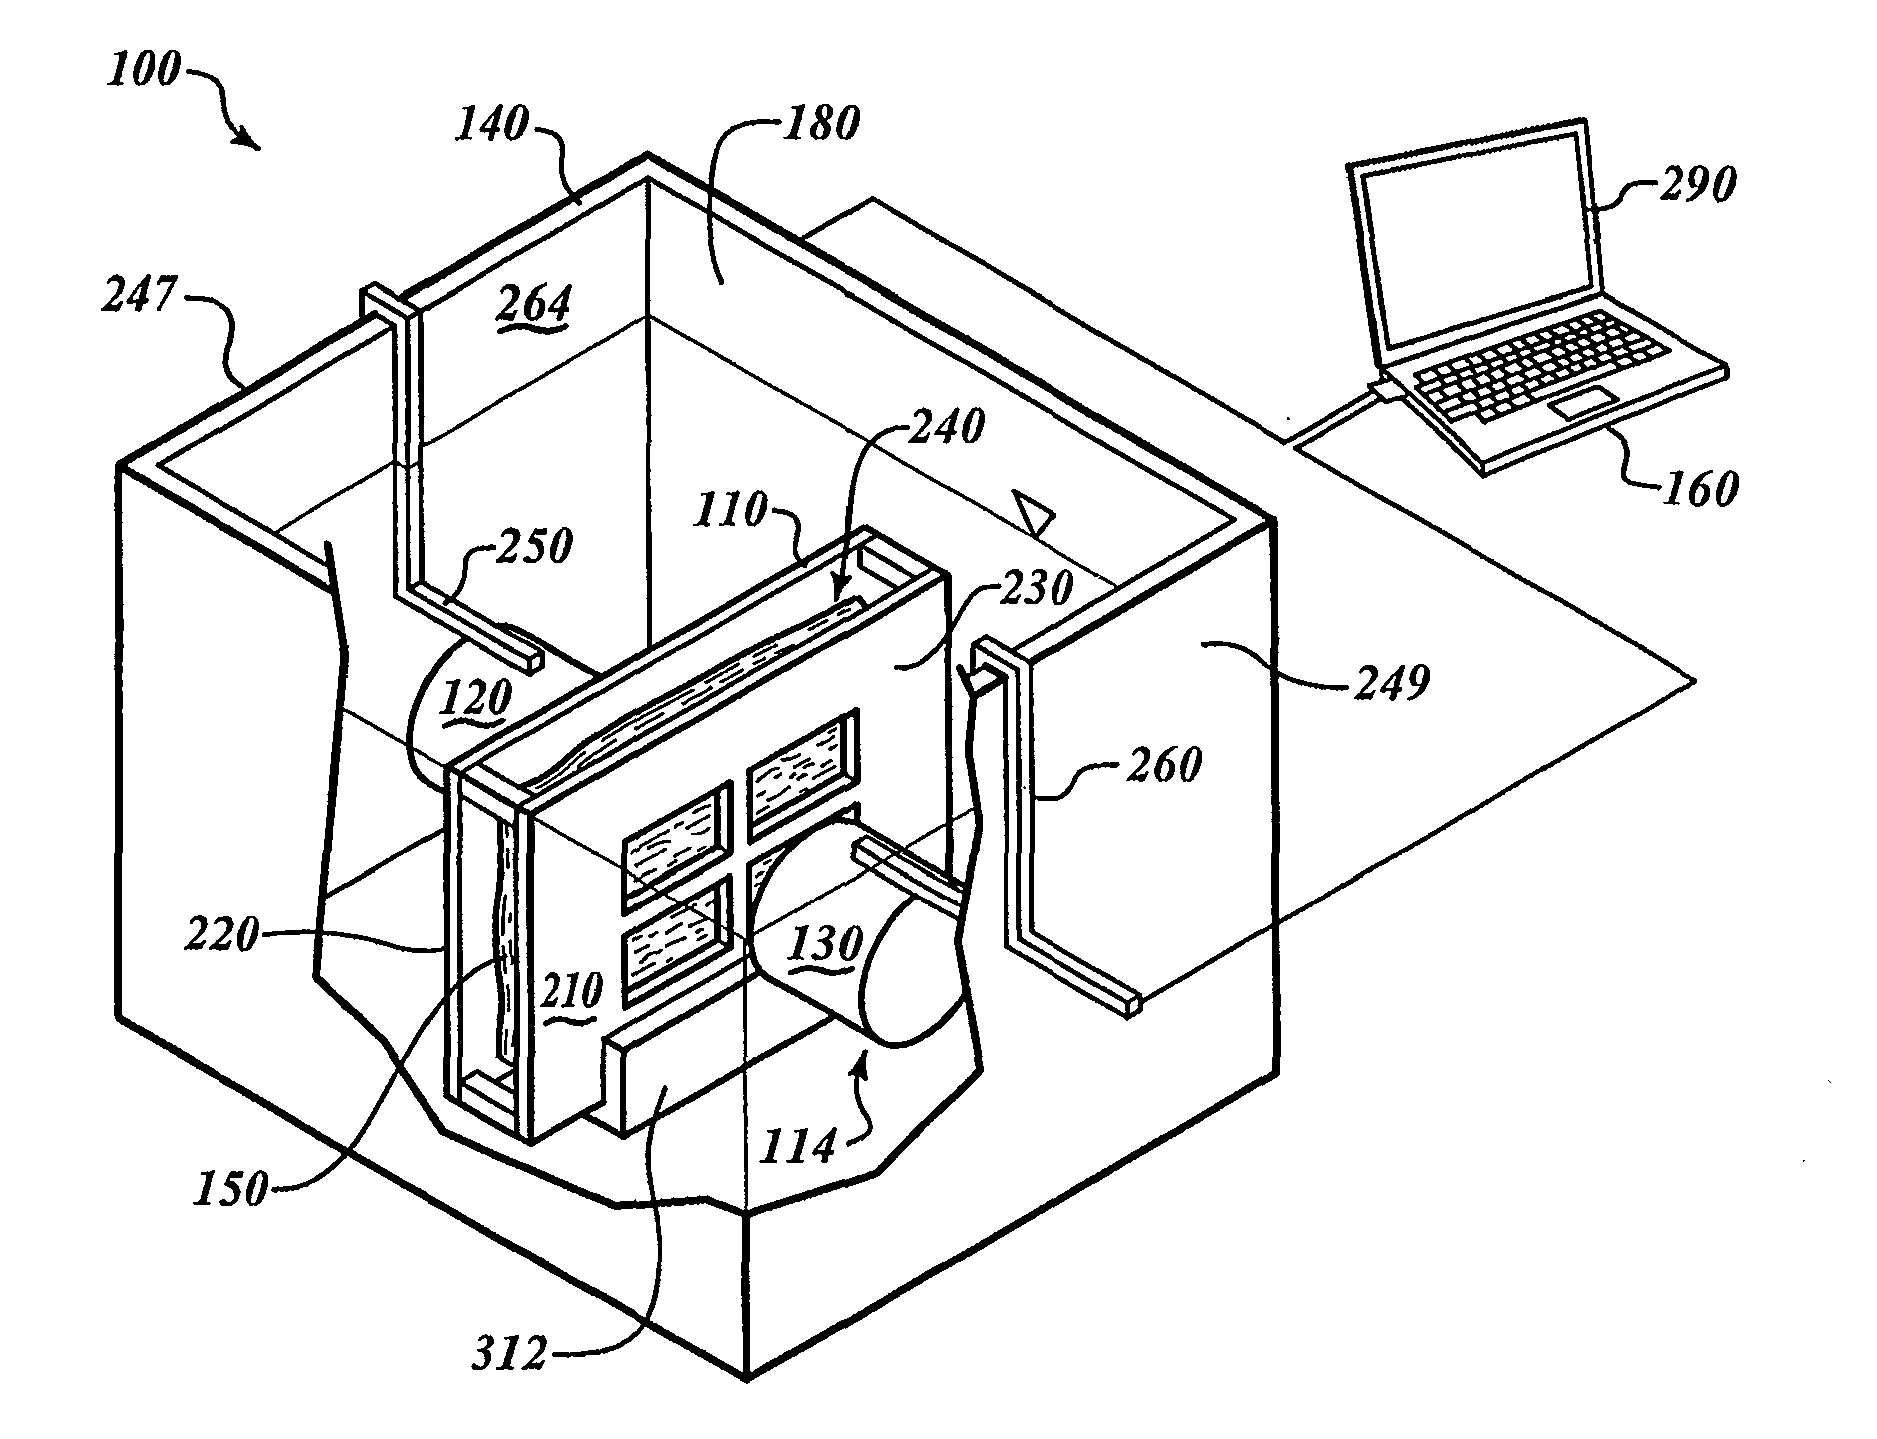 Processing system for processing specimens using acoustic energy